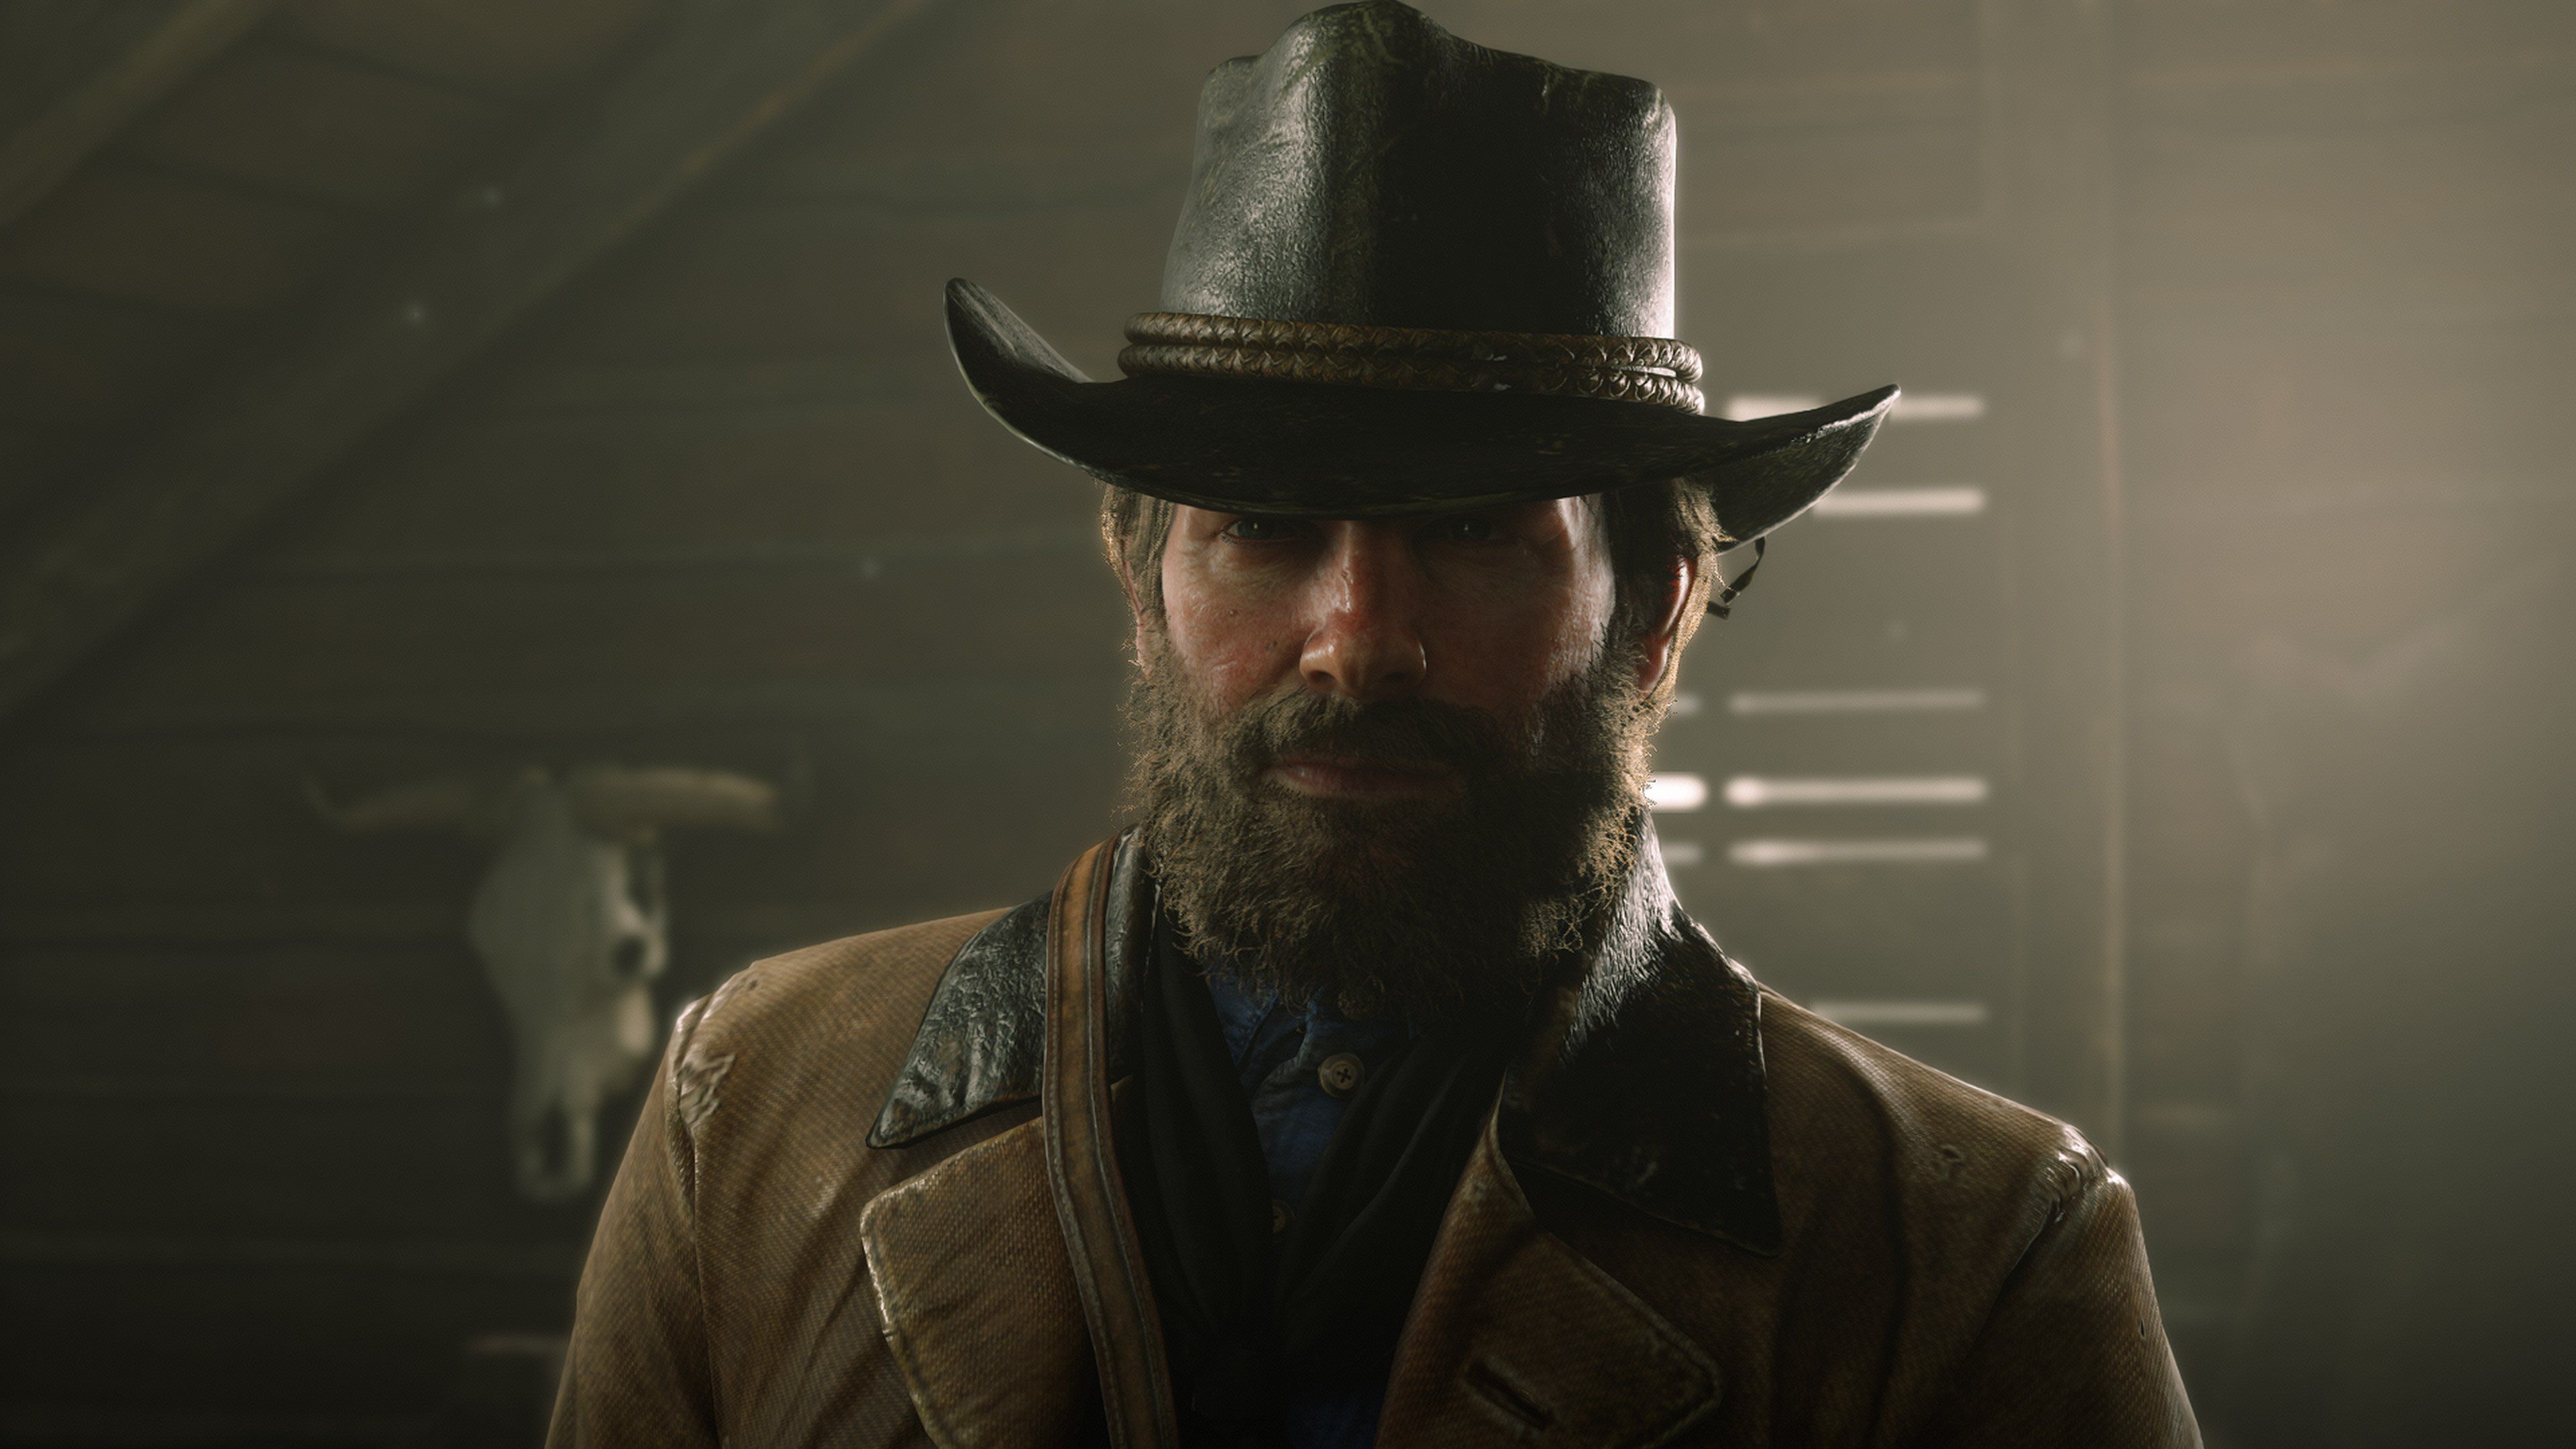 General 3840x2160 Rockstar Games Red Dead Redemption Red Dead Redemption 2 video games western cowboys Arthur Morgan beard video game characters